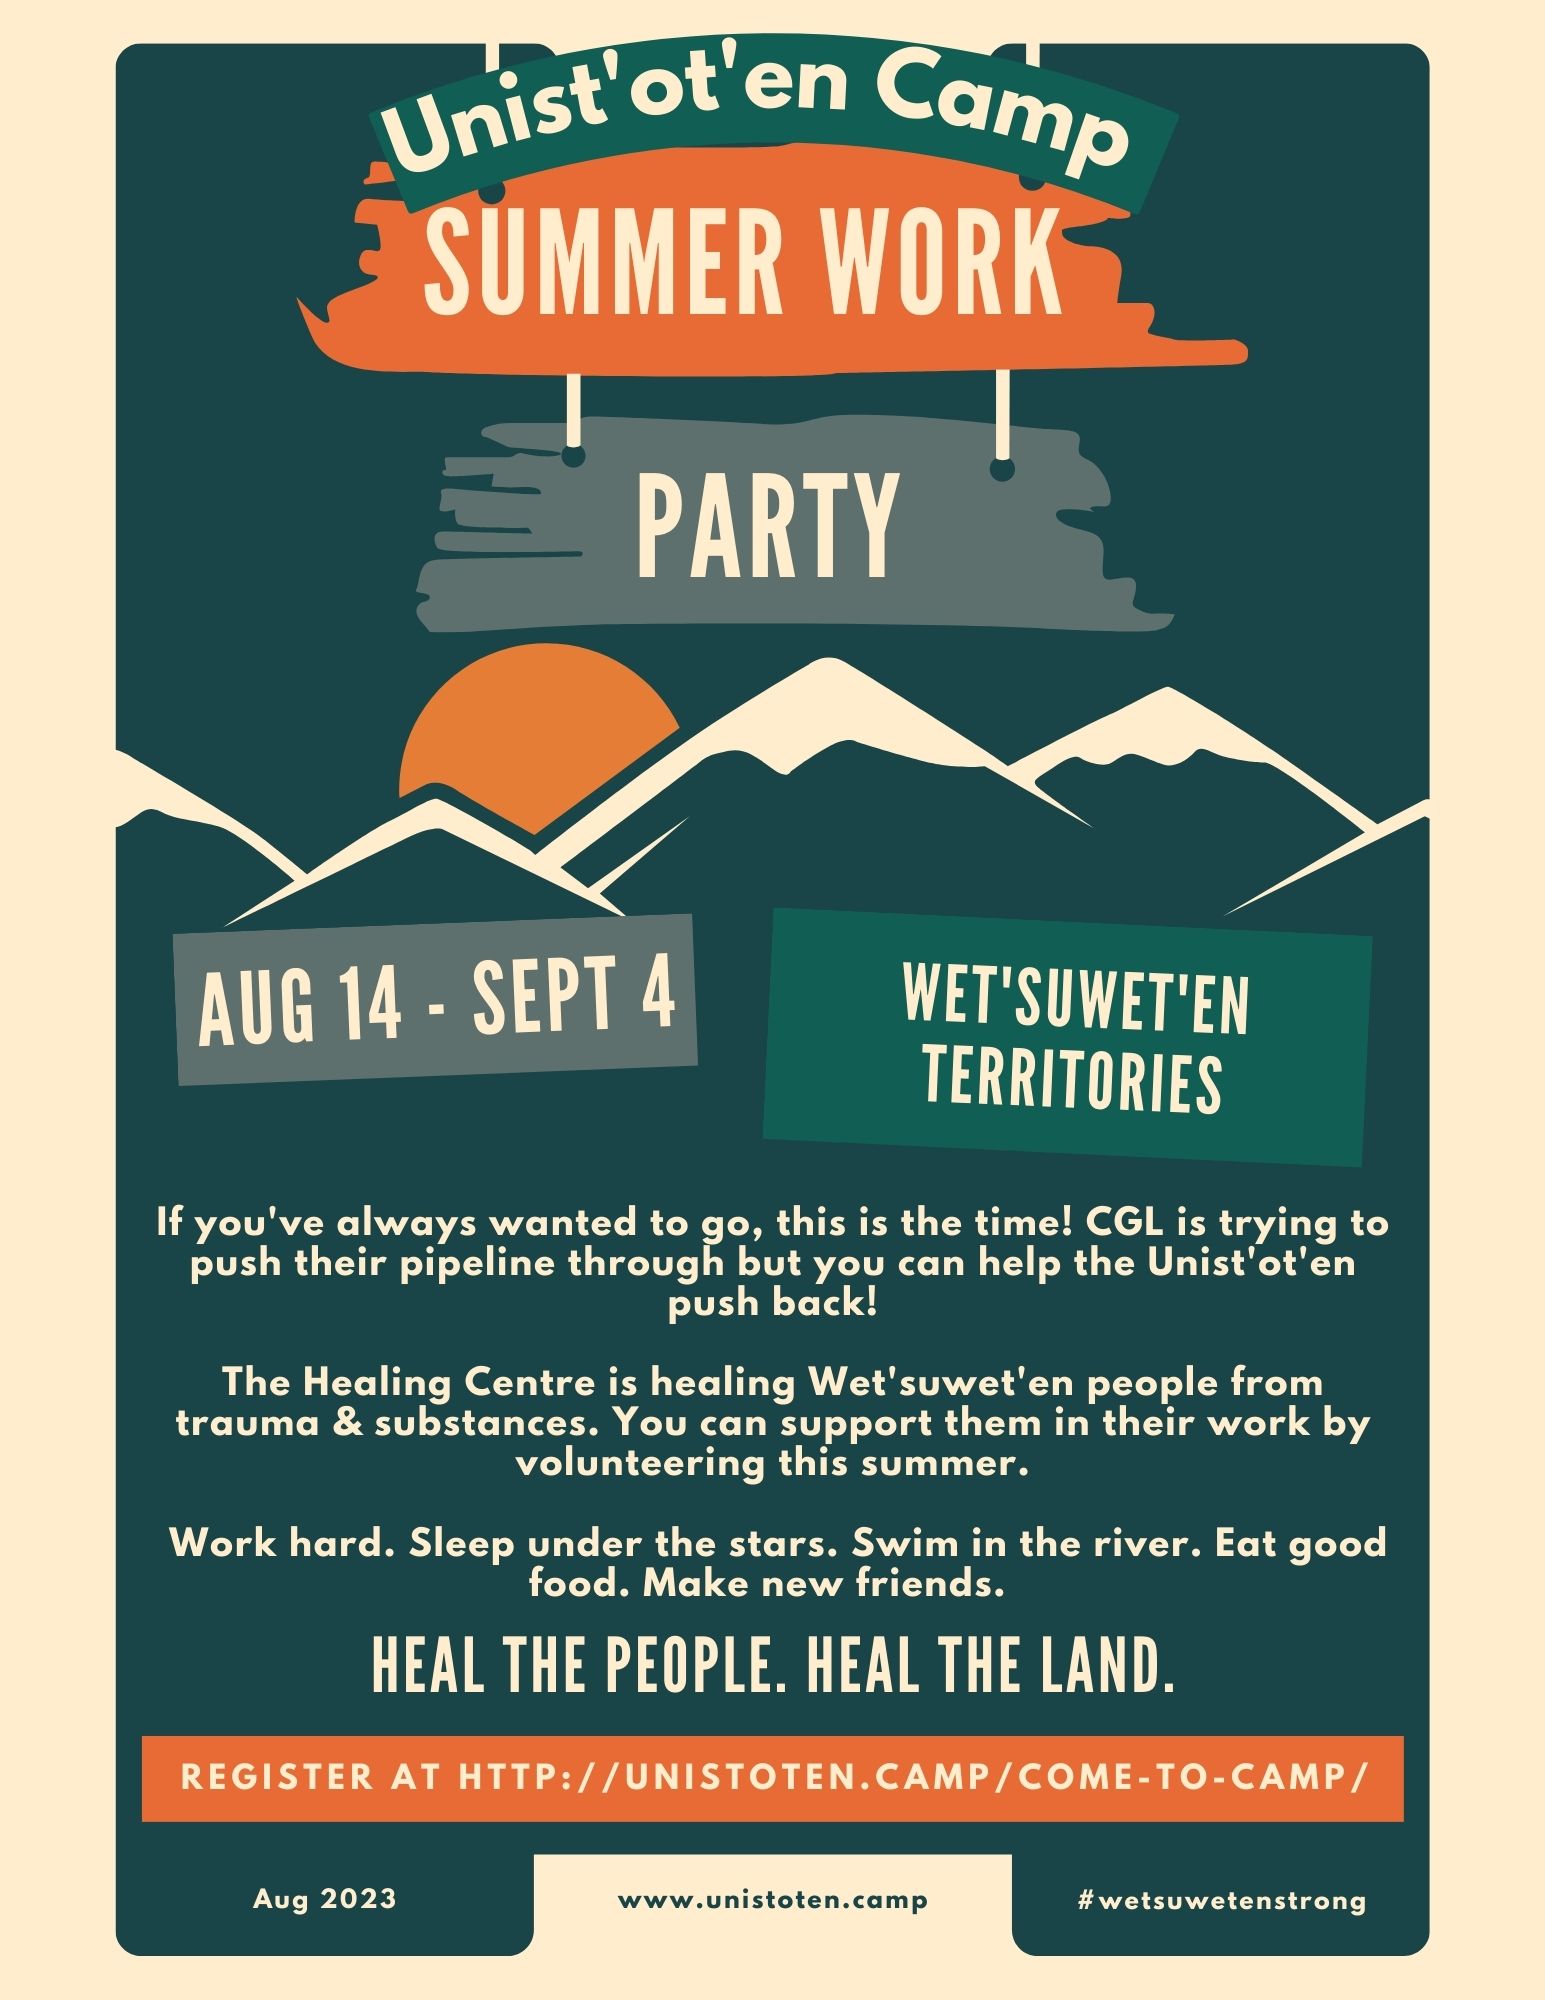 Unist'ot'en Camp SUMMER WORK PARTY AUG 14 - SEPT 4 WET'SUWET'EN TERRITORIES If you've always wanted to go, this is the time! CGL is trying...  to push their pipeline through but you can help the Unist'ot'en push back! The Healing Centre is healing Wet'suwet'en people from trauma & substances. You can support them in their work by volunteering this summer. Work hard. Sleep under the stars. Swim in the river. Eat good food. Make new friends. HEAL THE PEOPLE. HEAL THE LAND. REGISTER AT HTTP://UNISTOTEN.CAMP/COME-TO-CAMP/ Aug 2023 www.unistoten.camp #wetsuwetenstrong